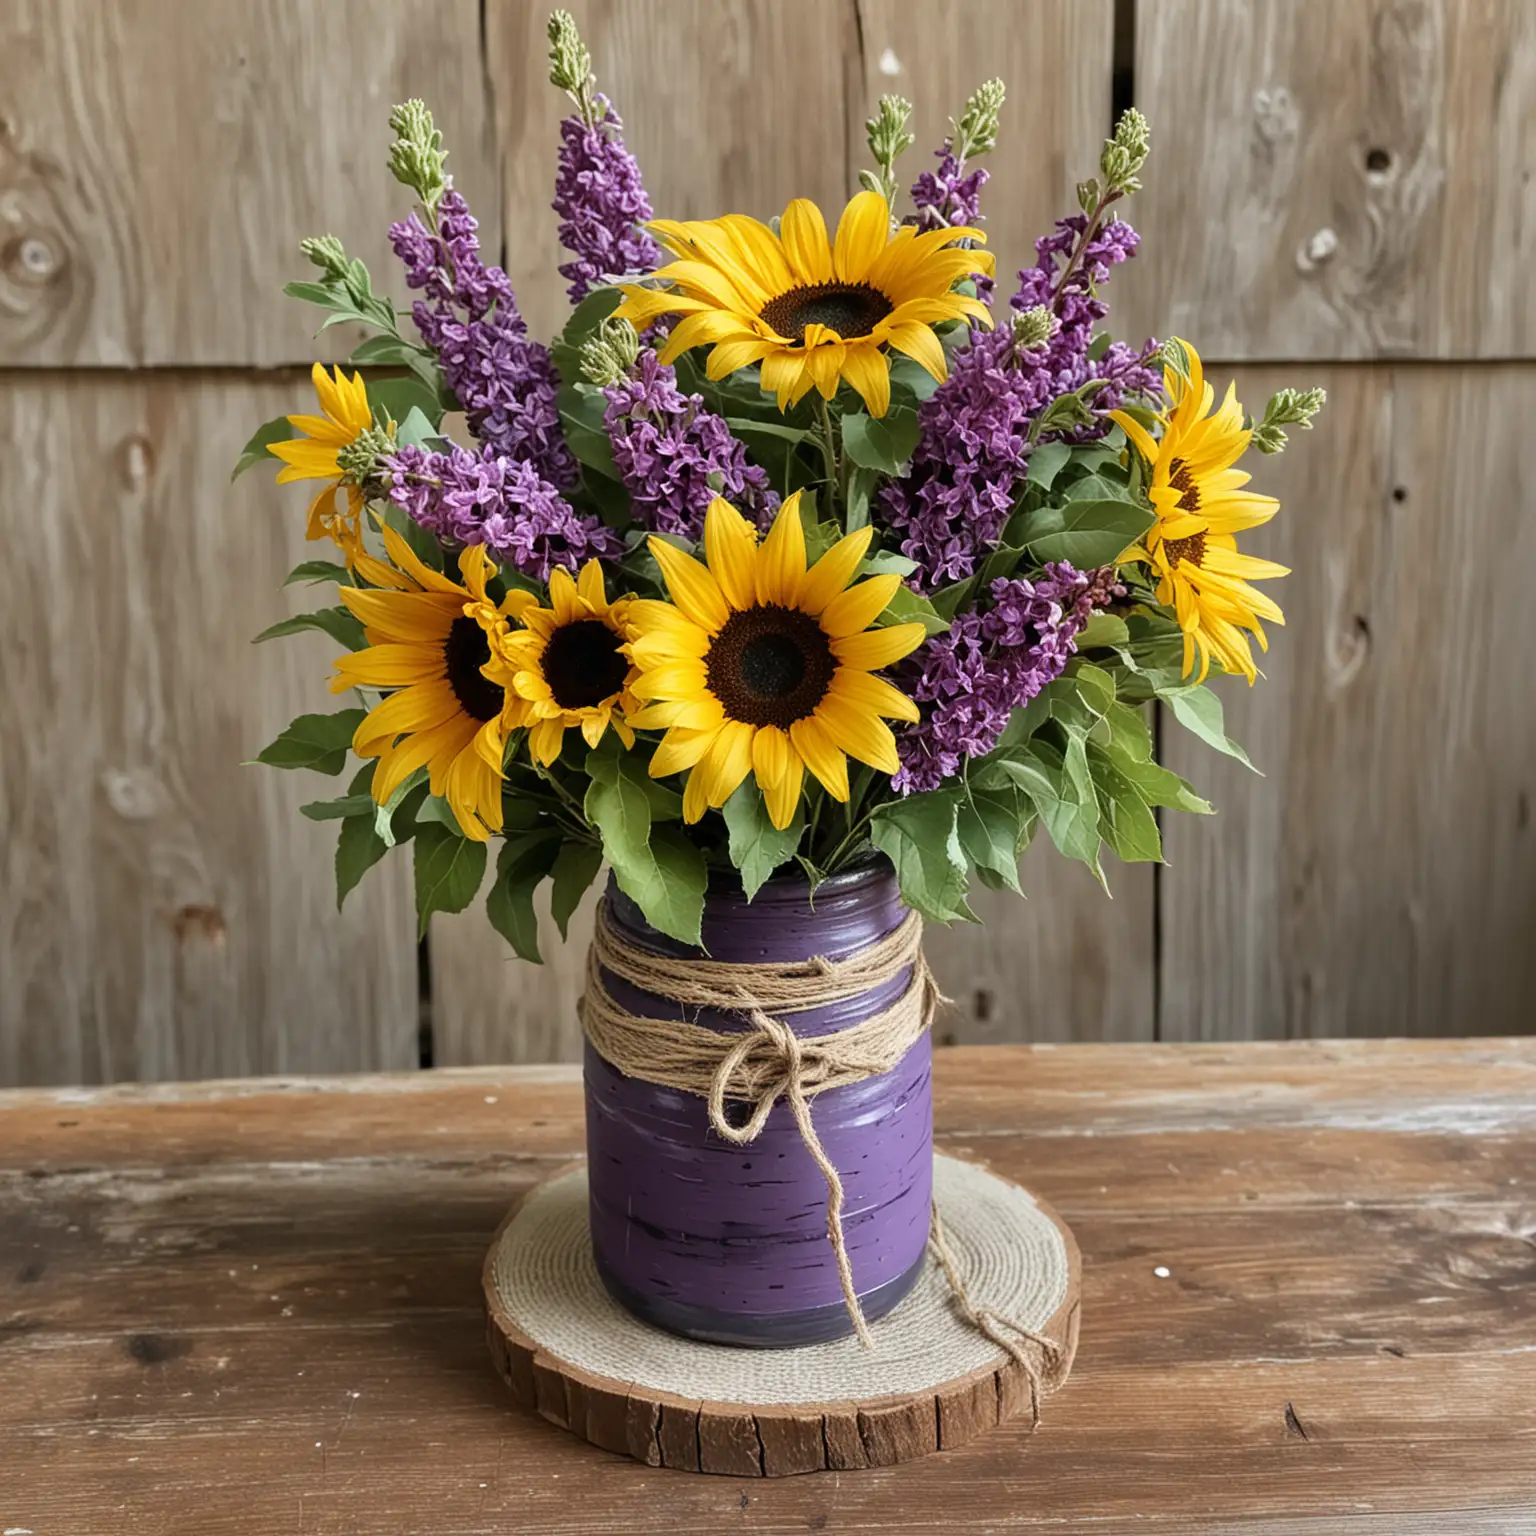 Rustic-Wedding-Centerpiece-Sunflowers-and-Lilacs-in-Distressed-Purple-Vase